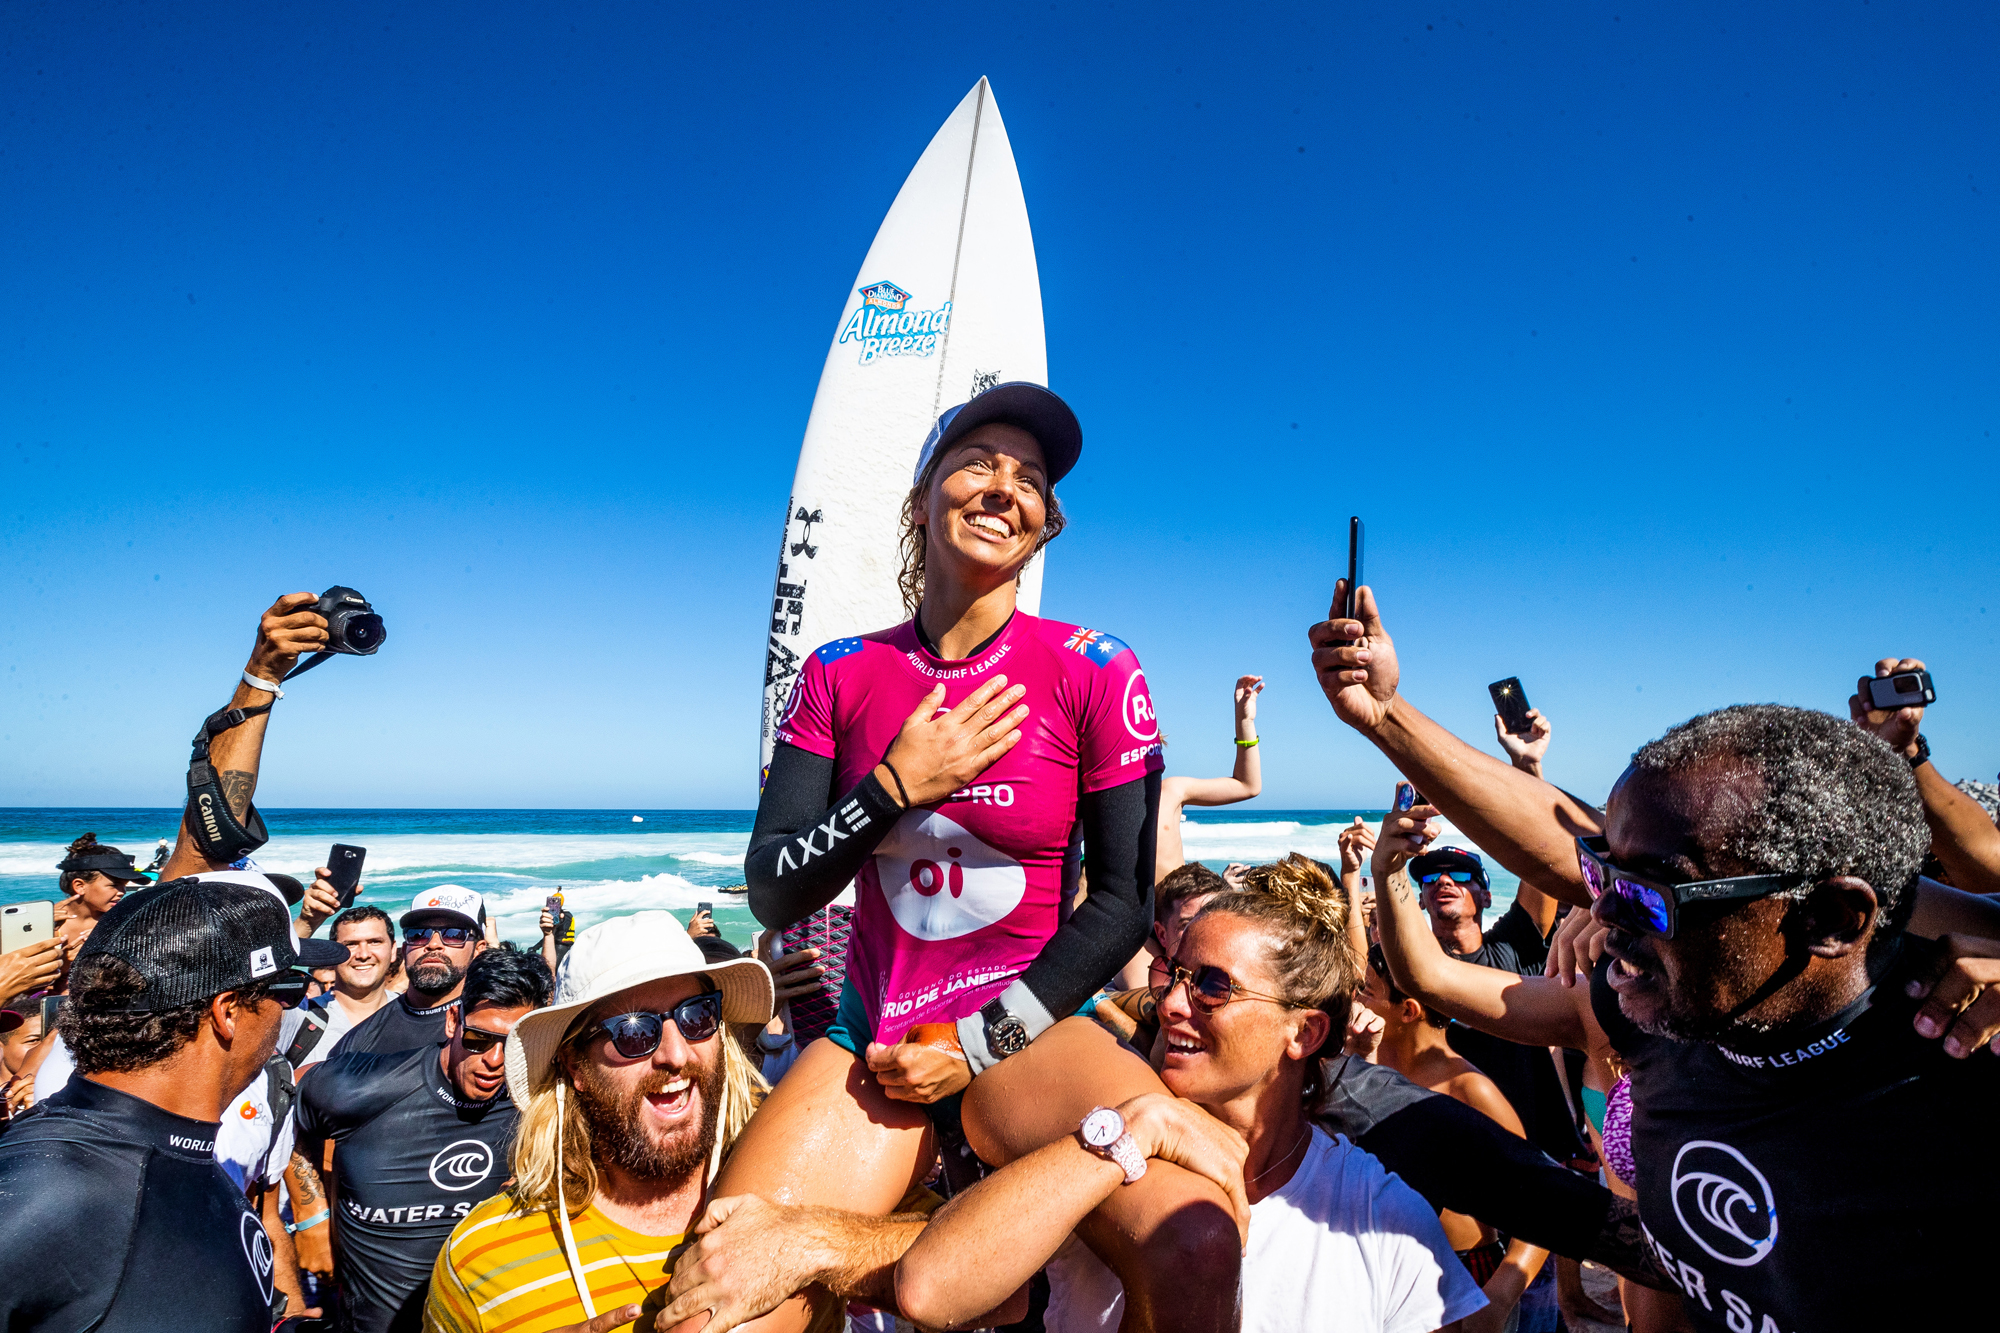 Photos of Sally Fitzgibbons - Sally Fitzgibbons - World 